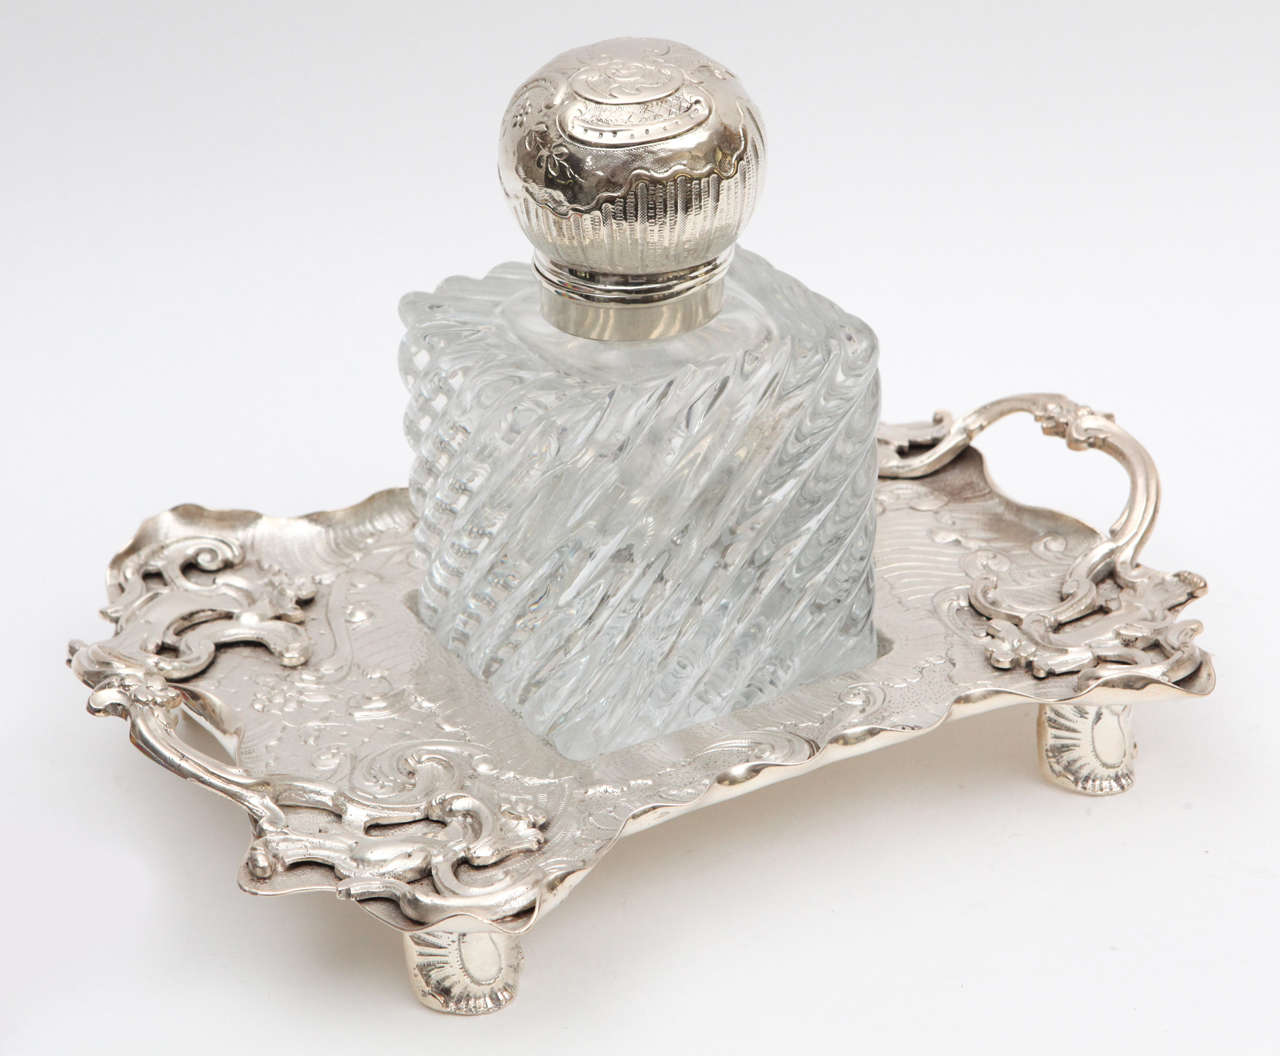 1900s English crystal and silver plated Sheffield inkwell on handled tray. The tray measurement is:
Depth: 10 inches.
Height: 2.75 inches.
Width: 14 inches.
The measurement below is for the inkwell.